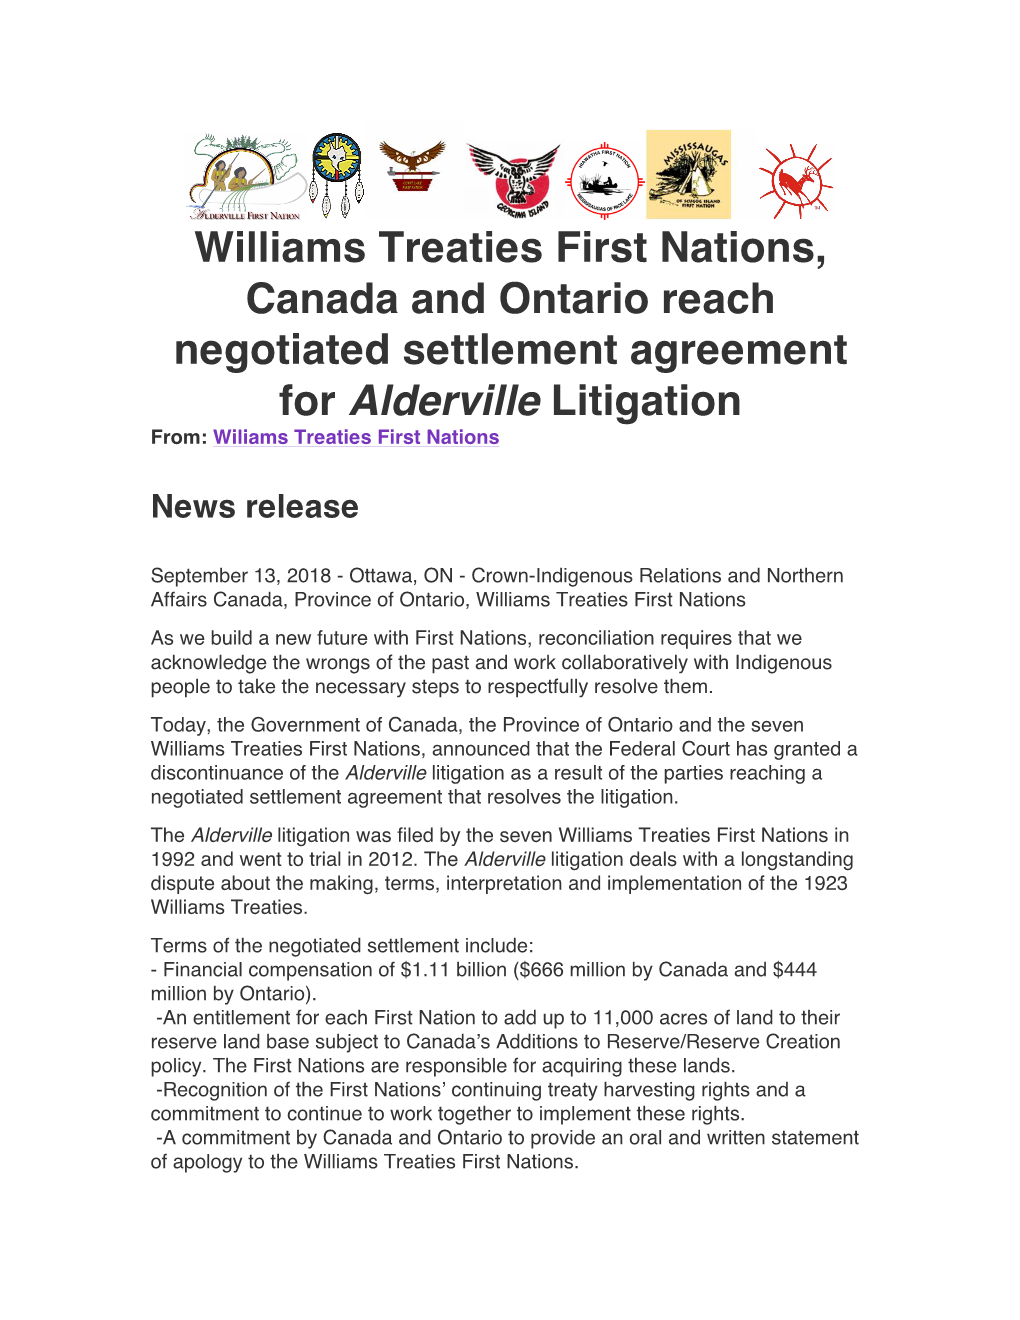 Williams Treaties First Nations, Canada and Ontario Reach Negotiated Settlement Agreement